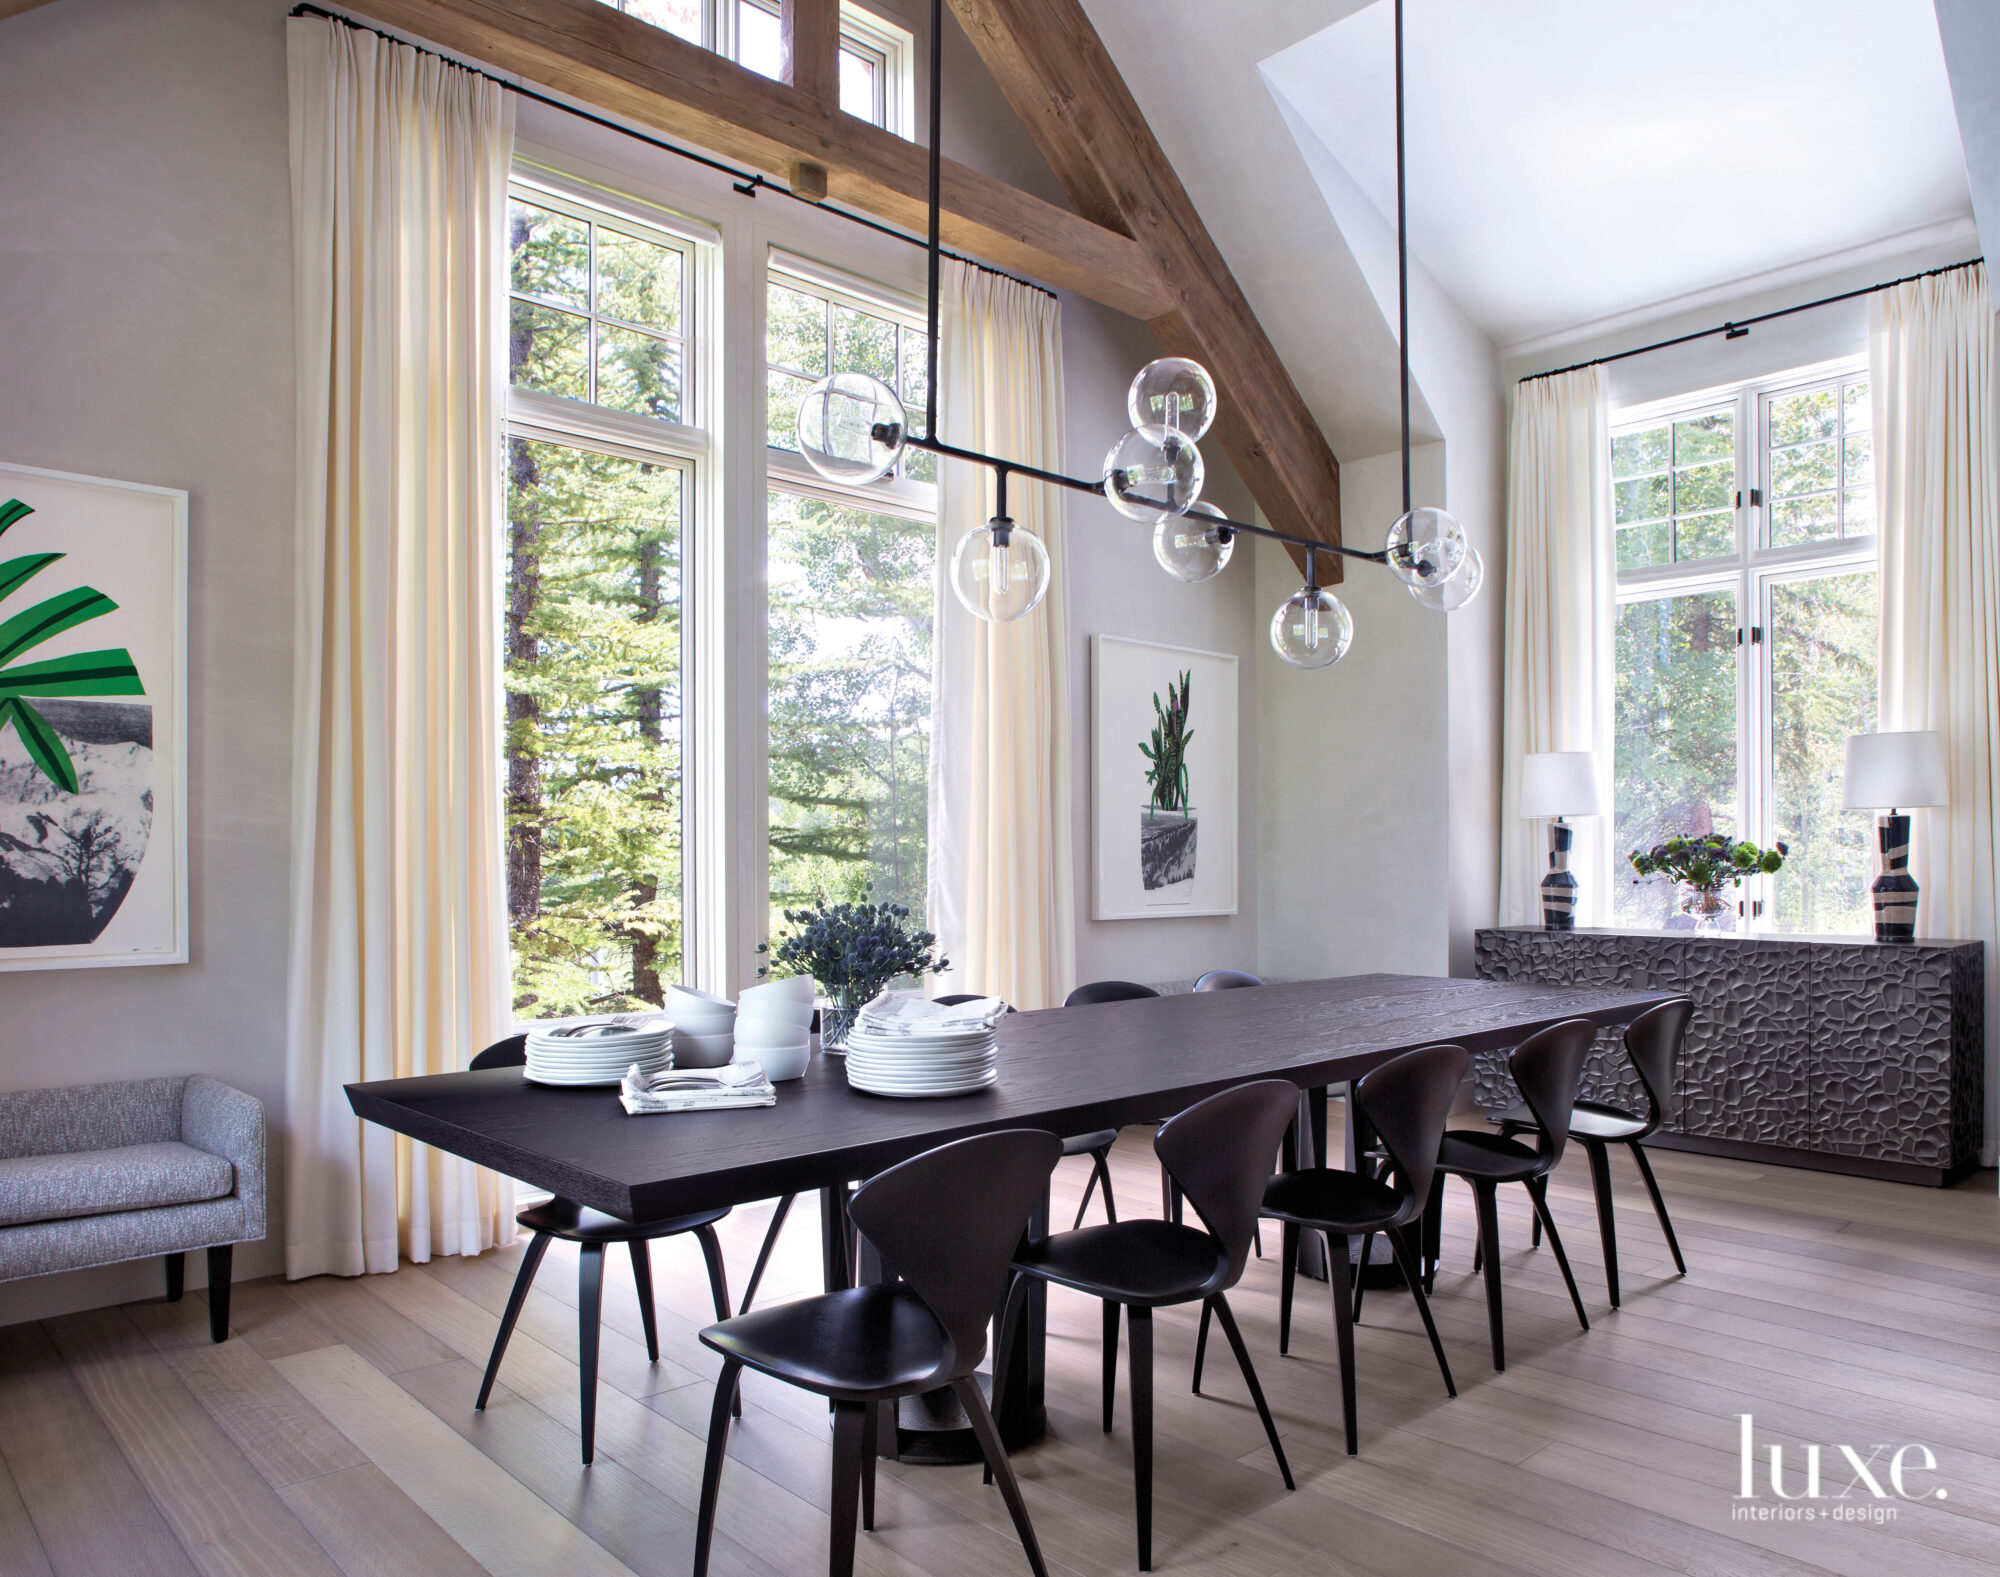 A dining room has a dark table and a linear chandelier overhead.